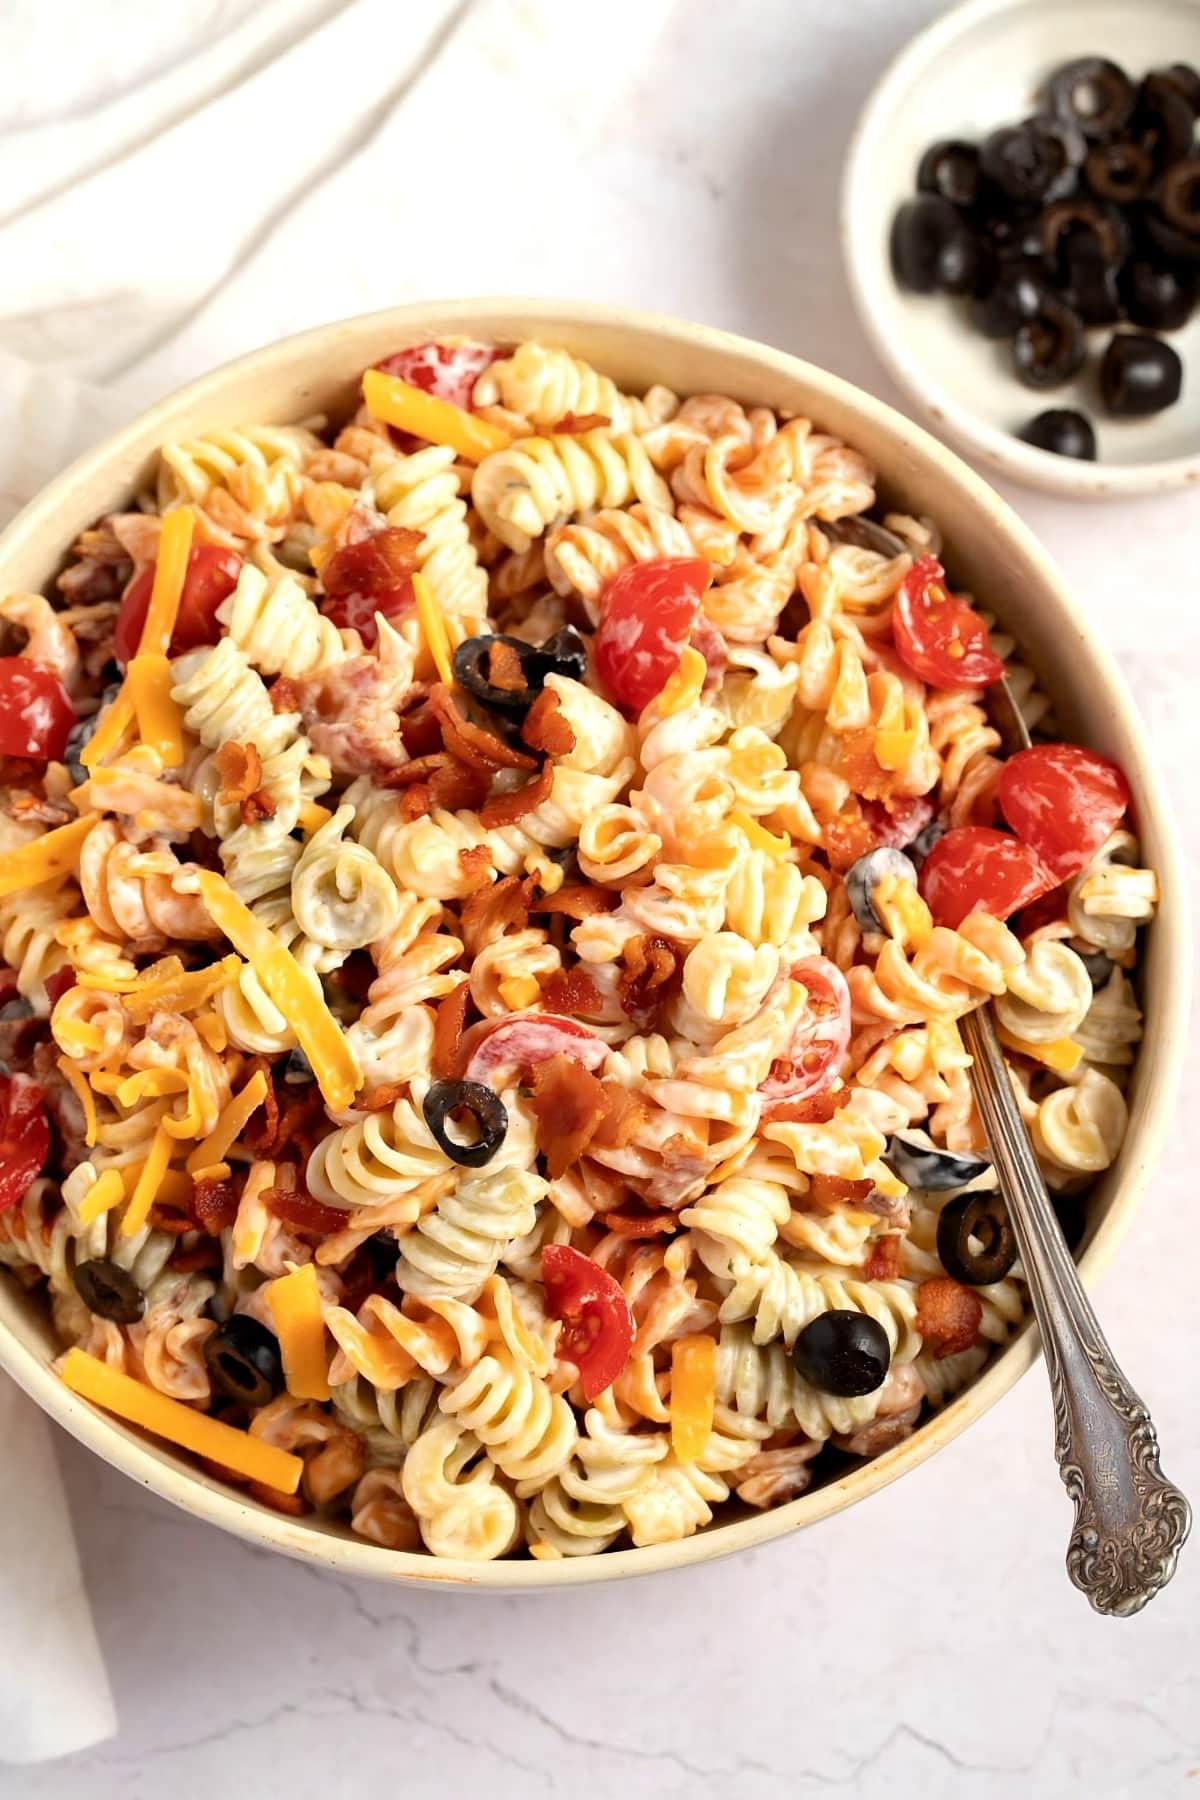 Bowl of salad made with rotini pasta, bacon, mayonnaise, garlic pepper and powder, milk, tomato, black olives and cheese